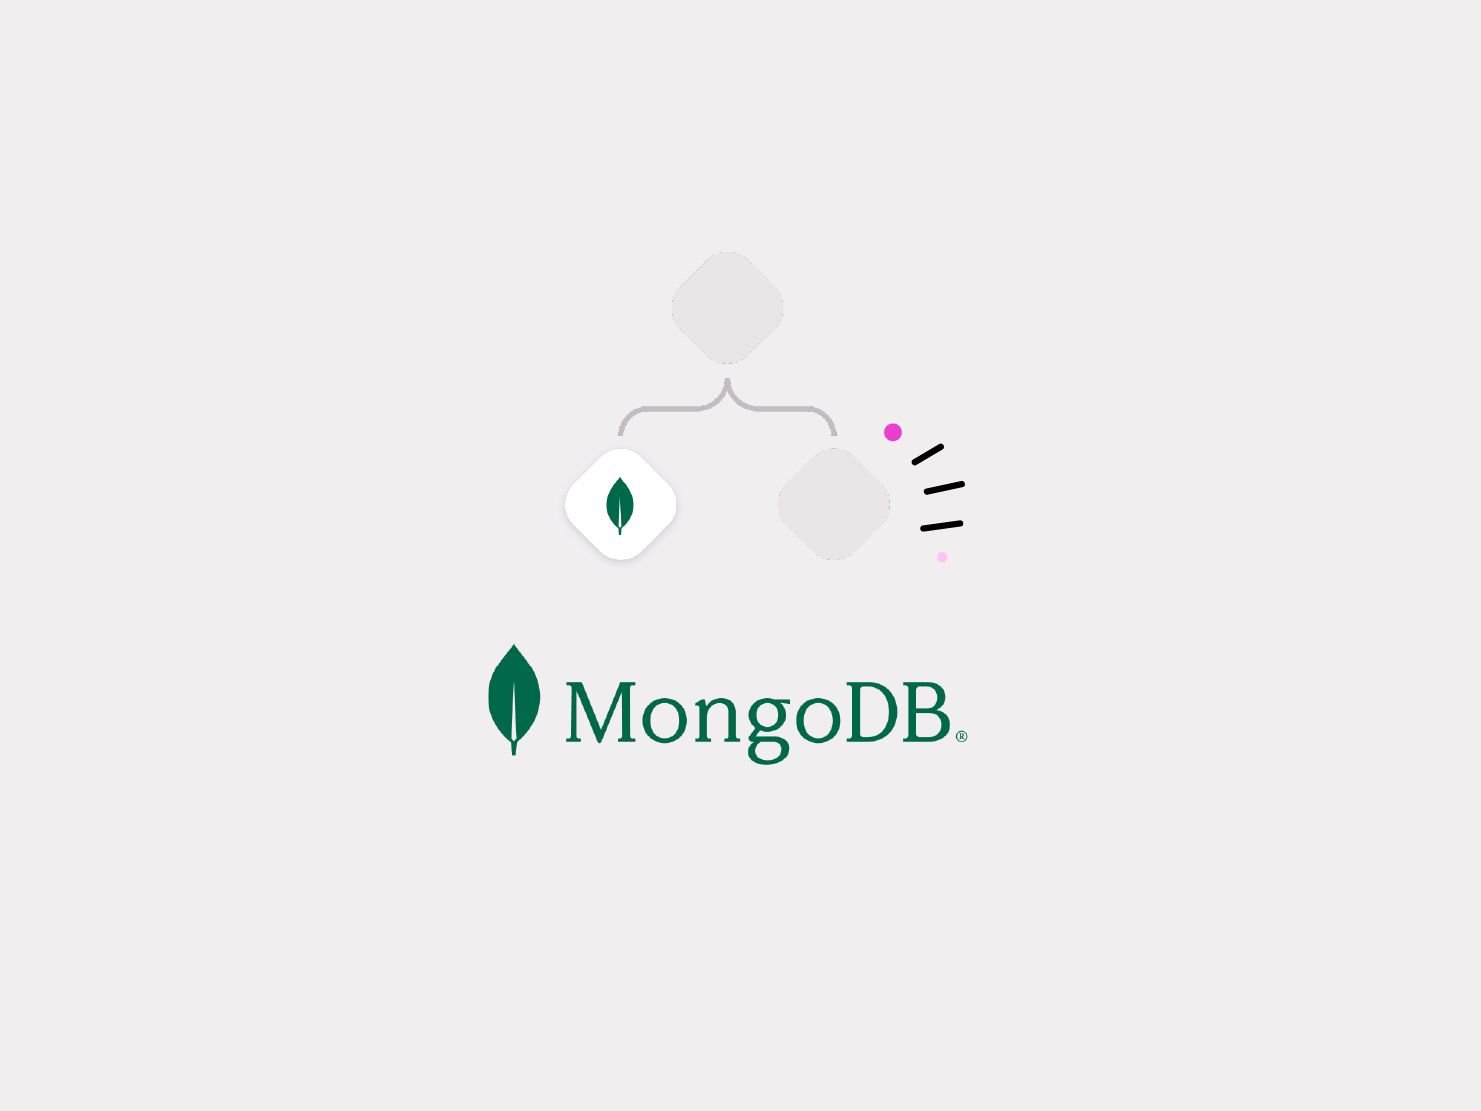 Platform.sh partners with MongoDB to help customers build modern applications faster